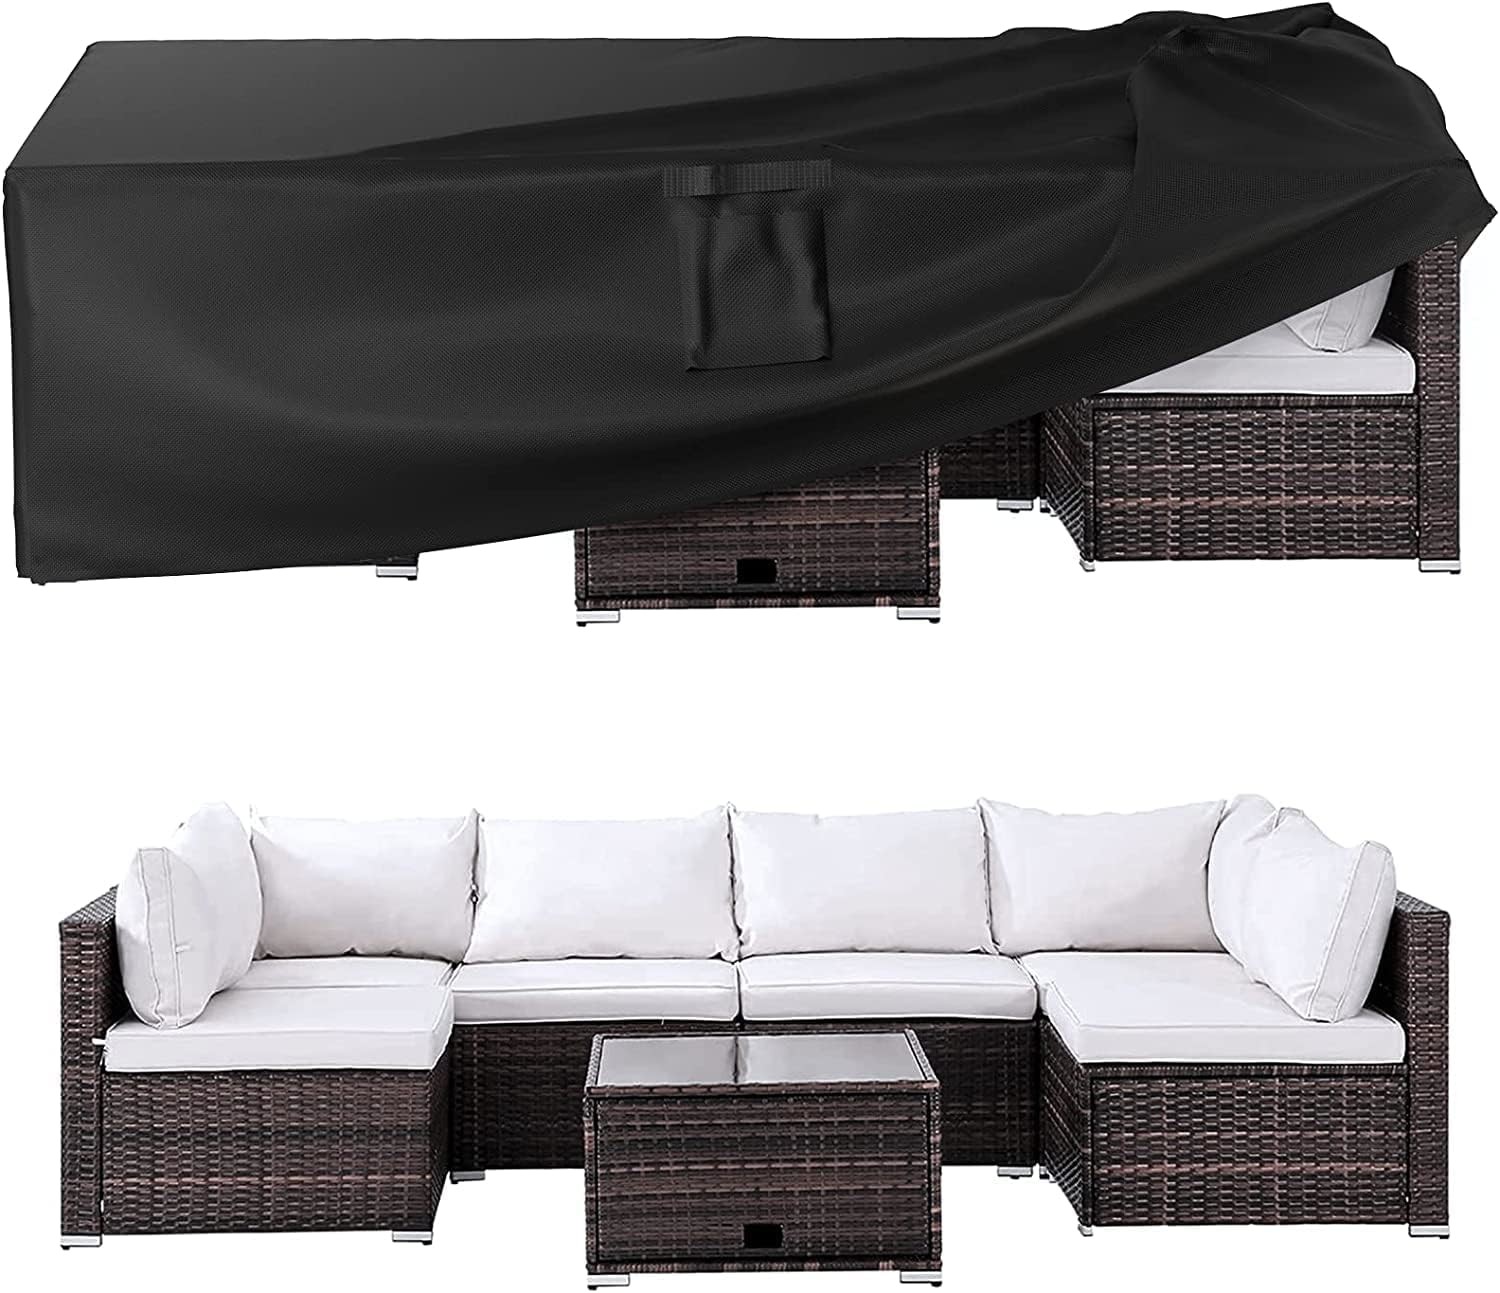 China Outdoor Waterproof Patio Furniture Covers,420D Oxford Polyester Black Rectangular Sectional Furniture Set Covers factory